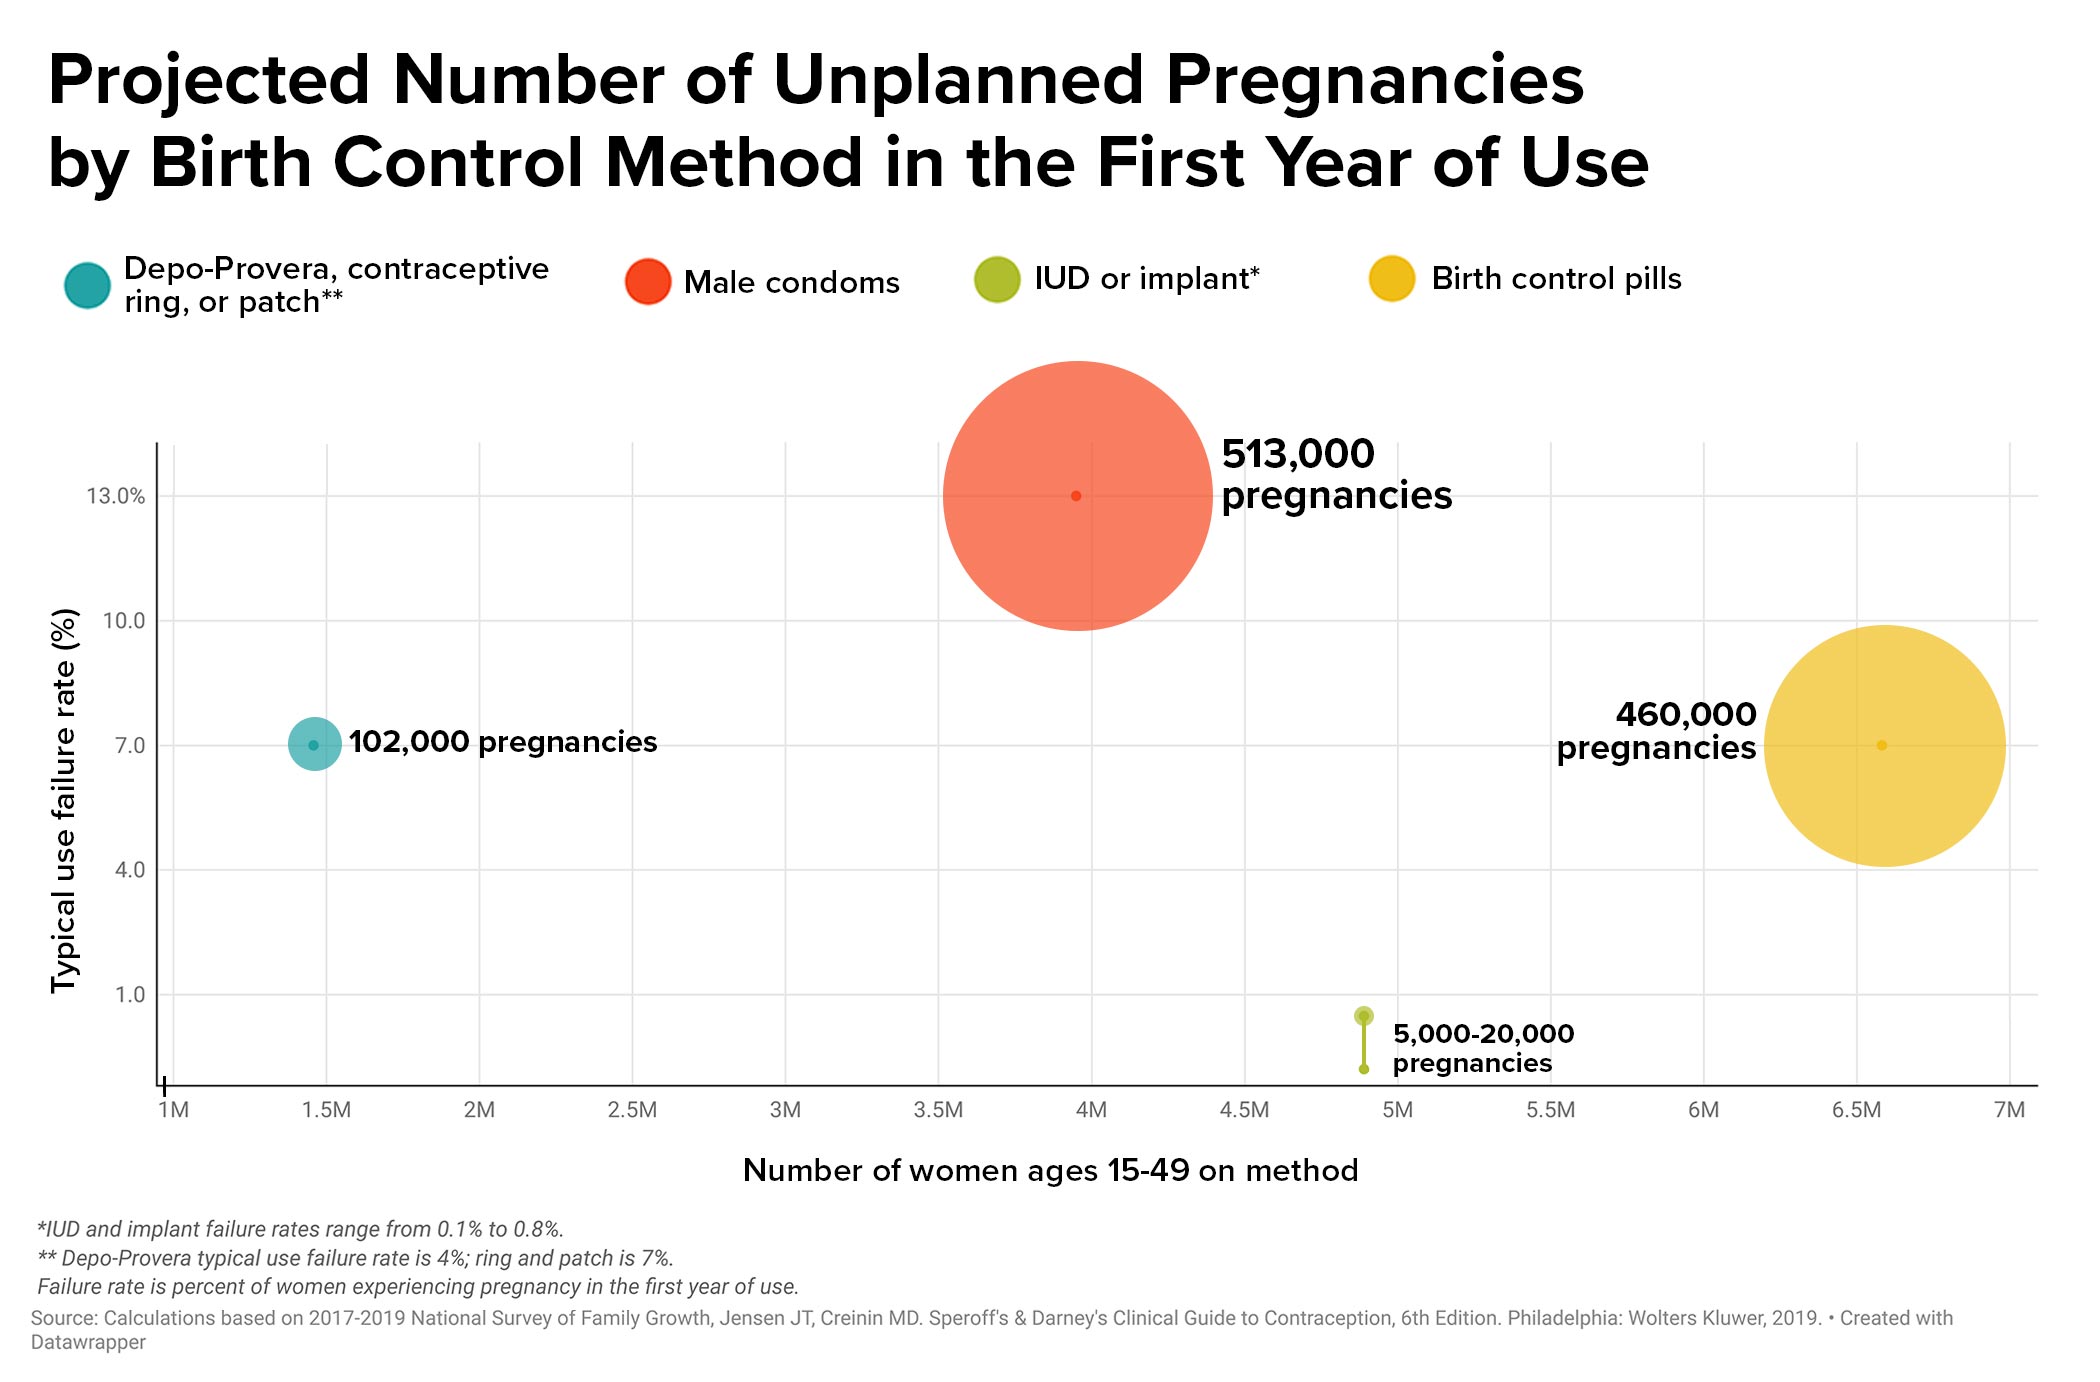 A chart is titled, "Projected Number of Unplanned Pregnancies by Birth Control Method in the First Year of Use." It displays the dots for four birth control methods with the dots sized by proportion of how many unexpected pregnancies could occur. The largest dot represents male condoms, with 513,000 expected pregnancies. The second largest represents birth control pills, with 460,000 pregnancies. The third largest represents Depo-Provera, contraceptive ring, or patch users, with 102,000 pregnancies. The smallest dot represents IUD or implants, with between 5,000 to 20,000 pregnancies.